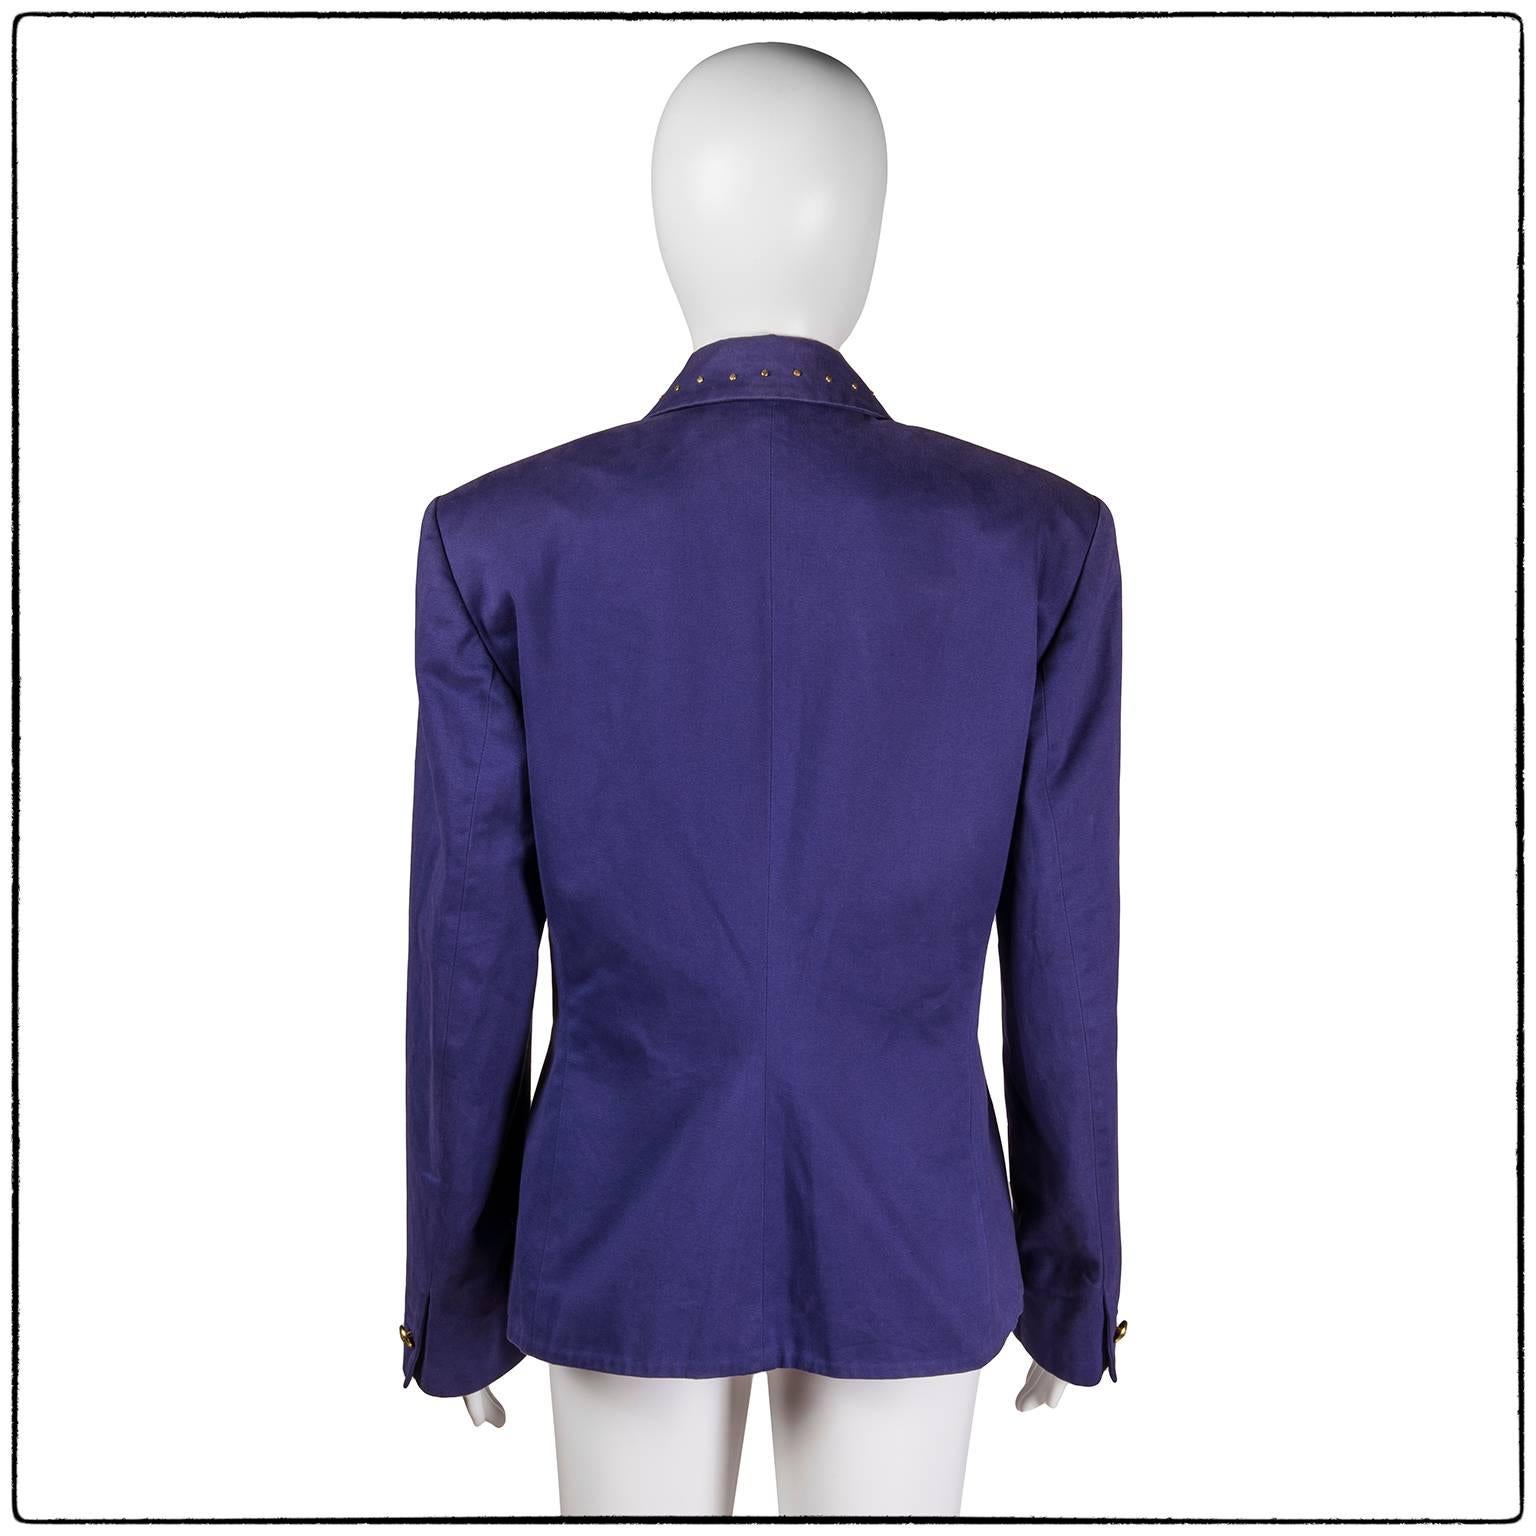 Gianni Versace Jeans Couture Bondage purple jacket 1990's.
Purple cotton jacket with gold tone metal applications on pockets and collar
Collectible piece 

Size: 46 it, 14 UK, 12 US, it wears more like a 44 It, 12 UK, 10 US

Material: